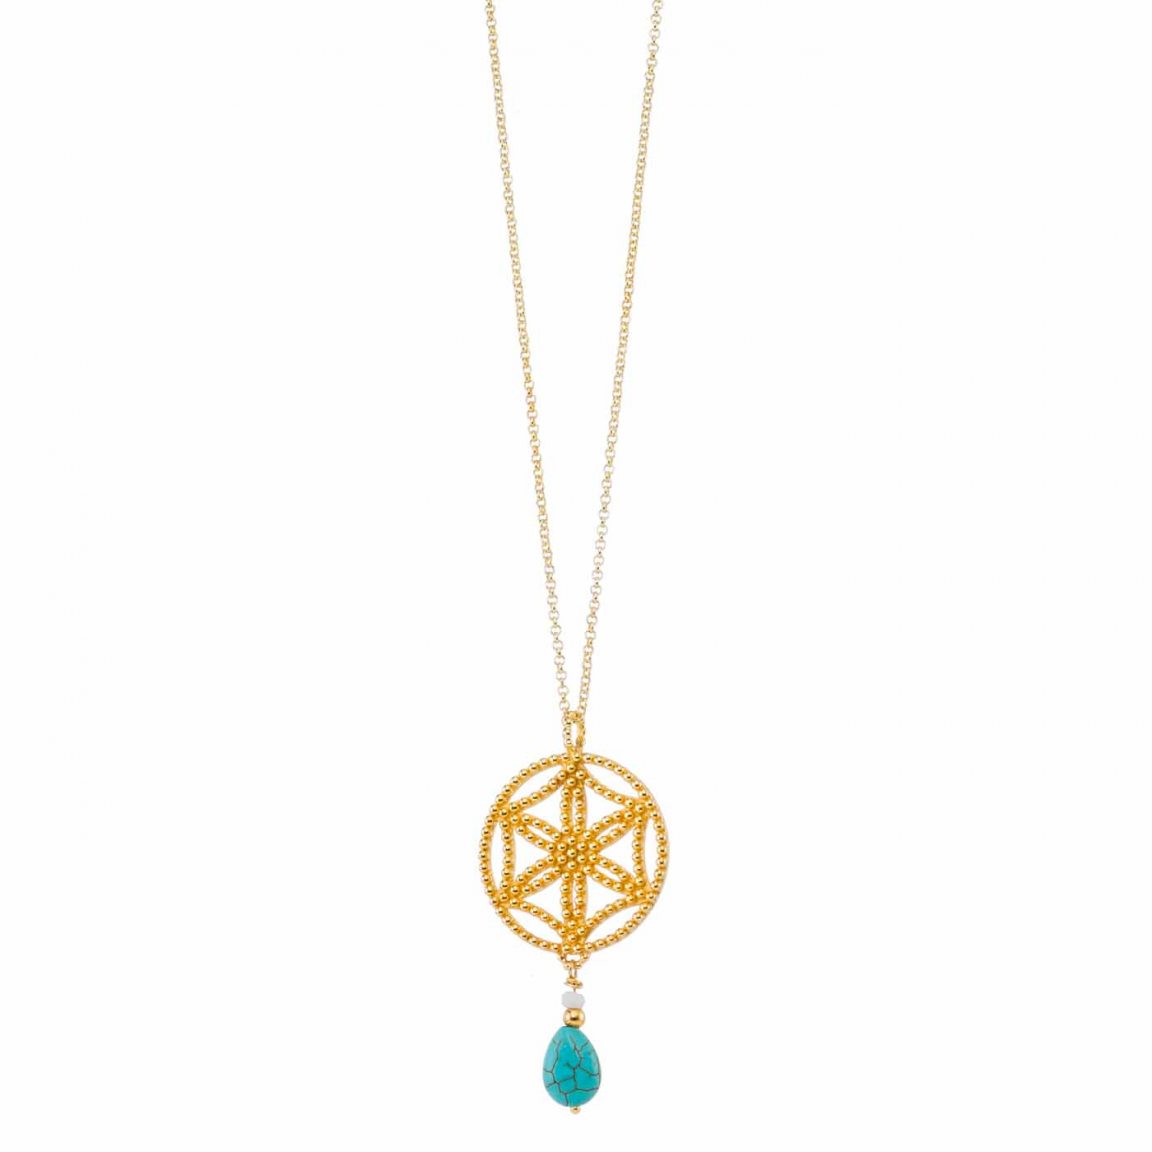 Long gold-plated pendant with howlite